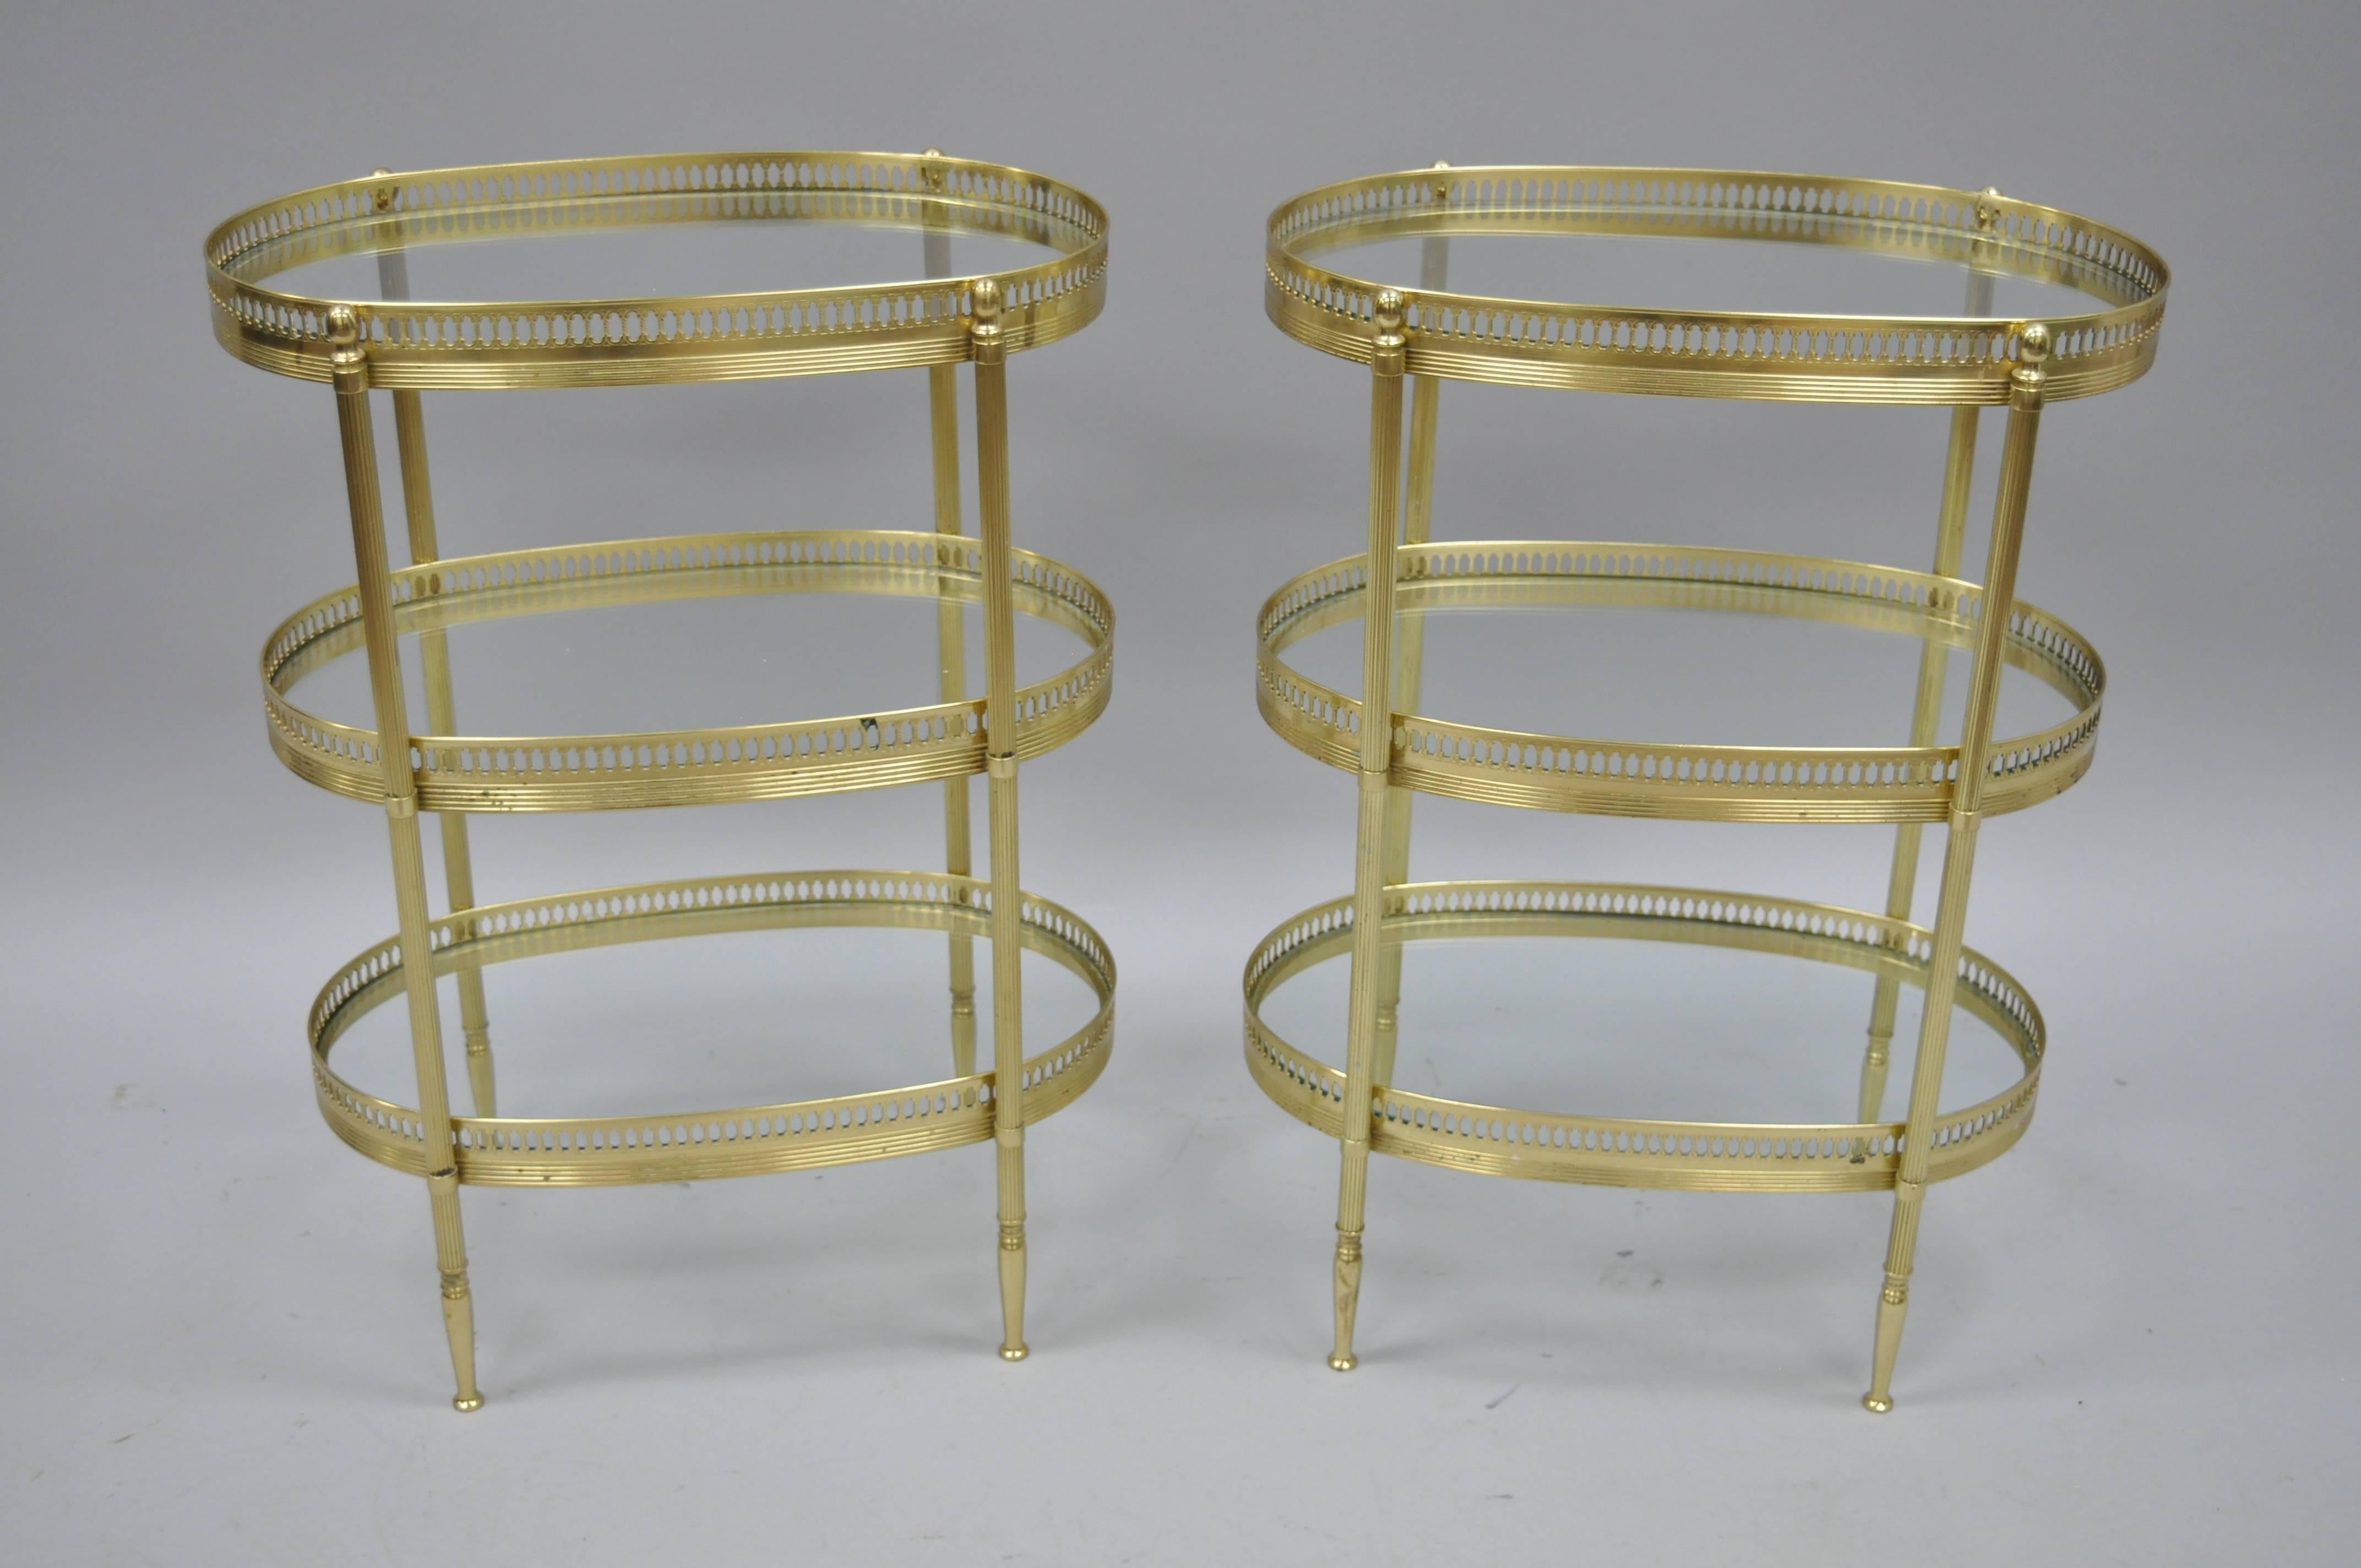 A vintage pair of petite brass oval end tables with inset glass shelves, circa mid-20th century. These Maison Jansen inspired French tables feature three tiers of clear glass shelves decorated with oval pierced galleries. Tables are raised on four